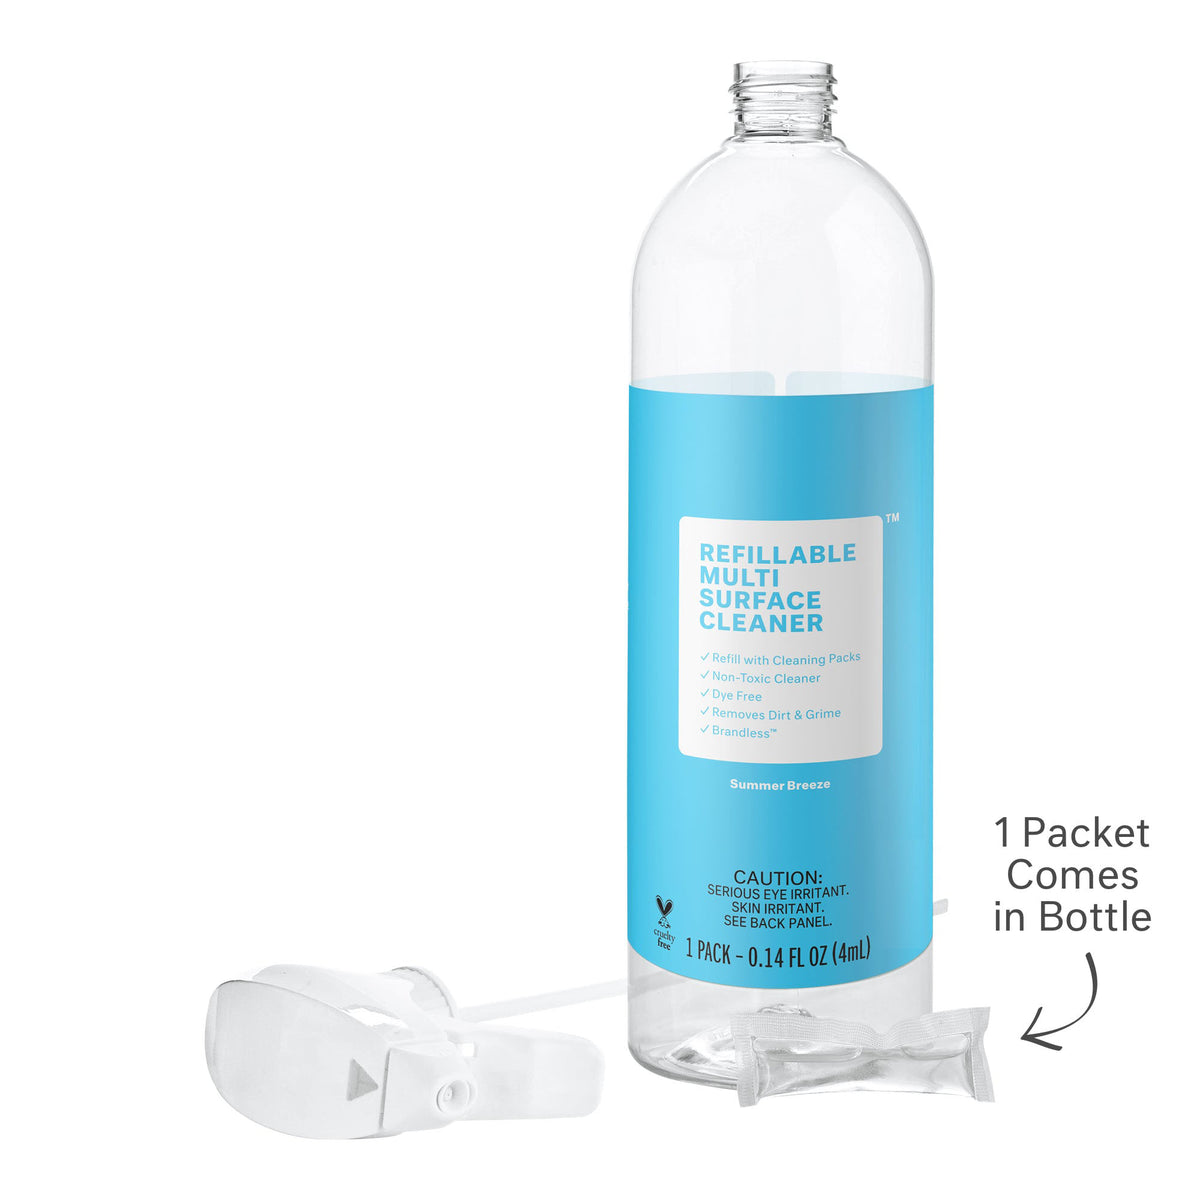 Multi surface cleaner bottle front view with visual of refill packet